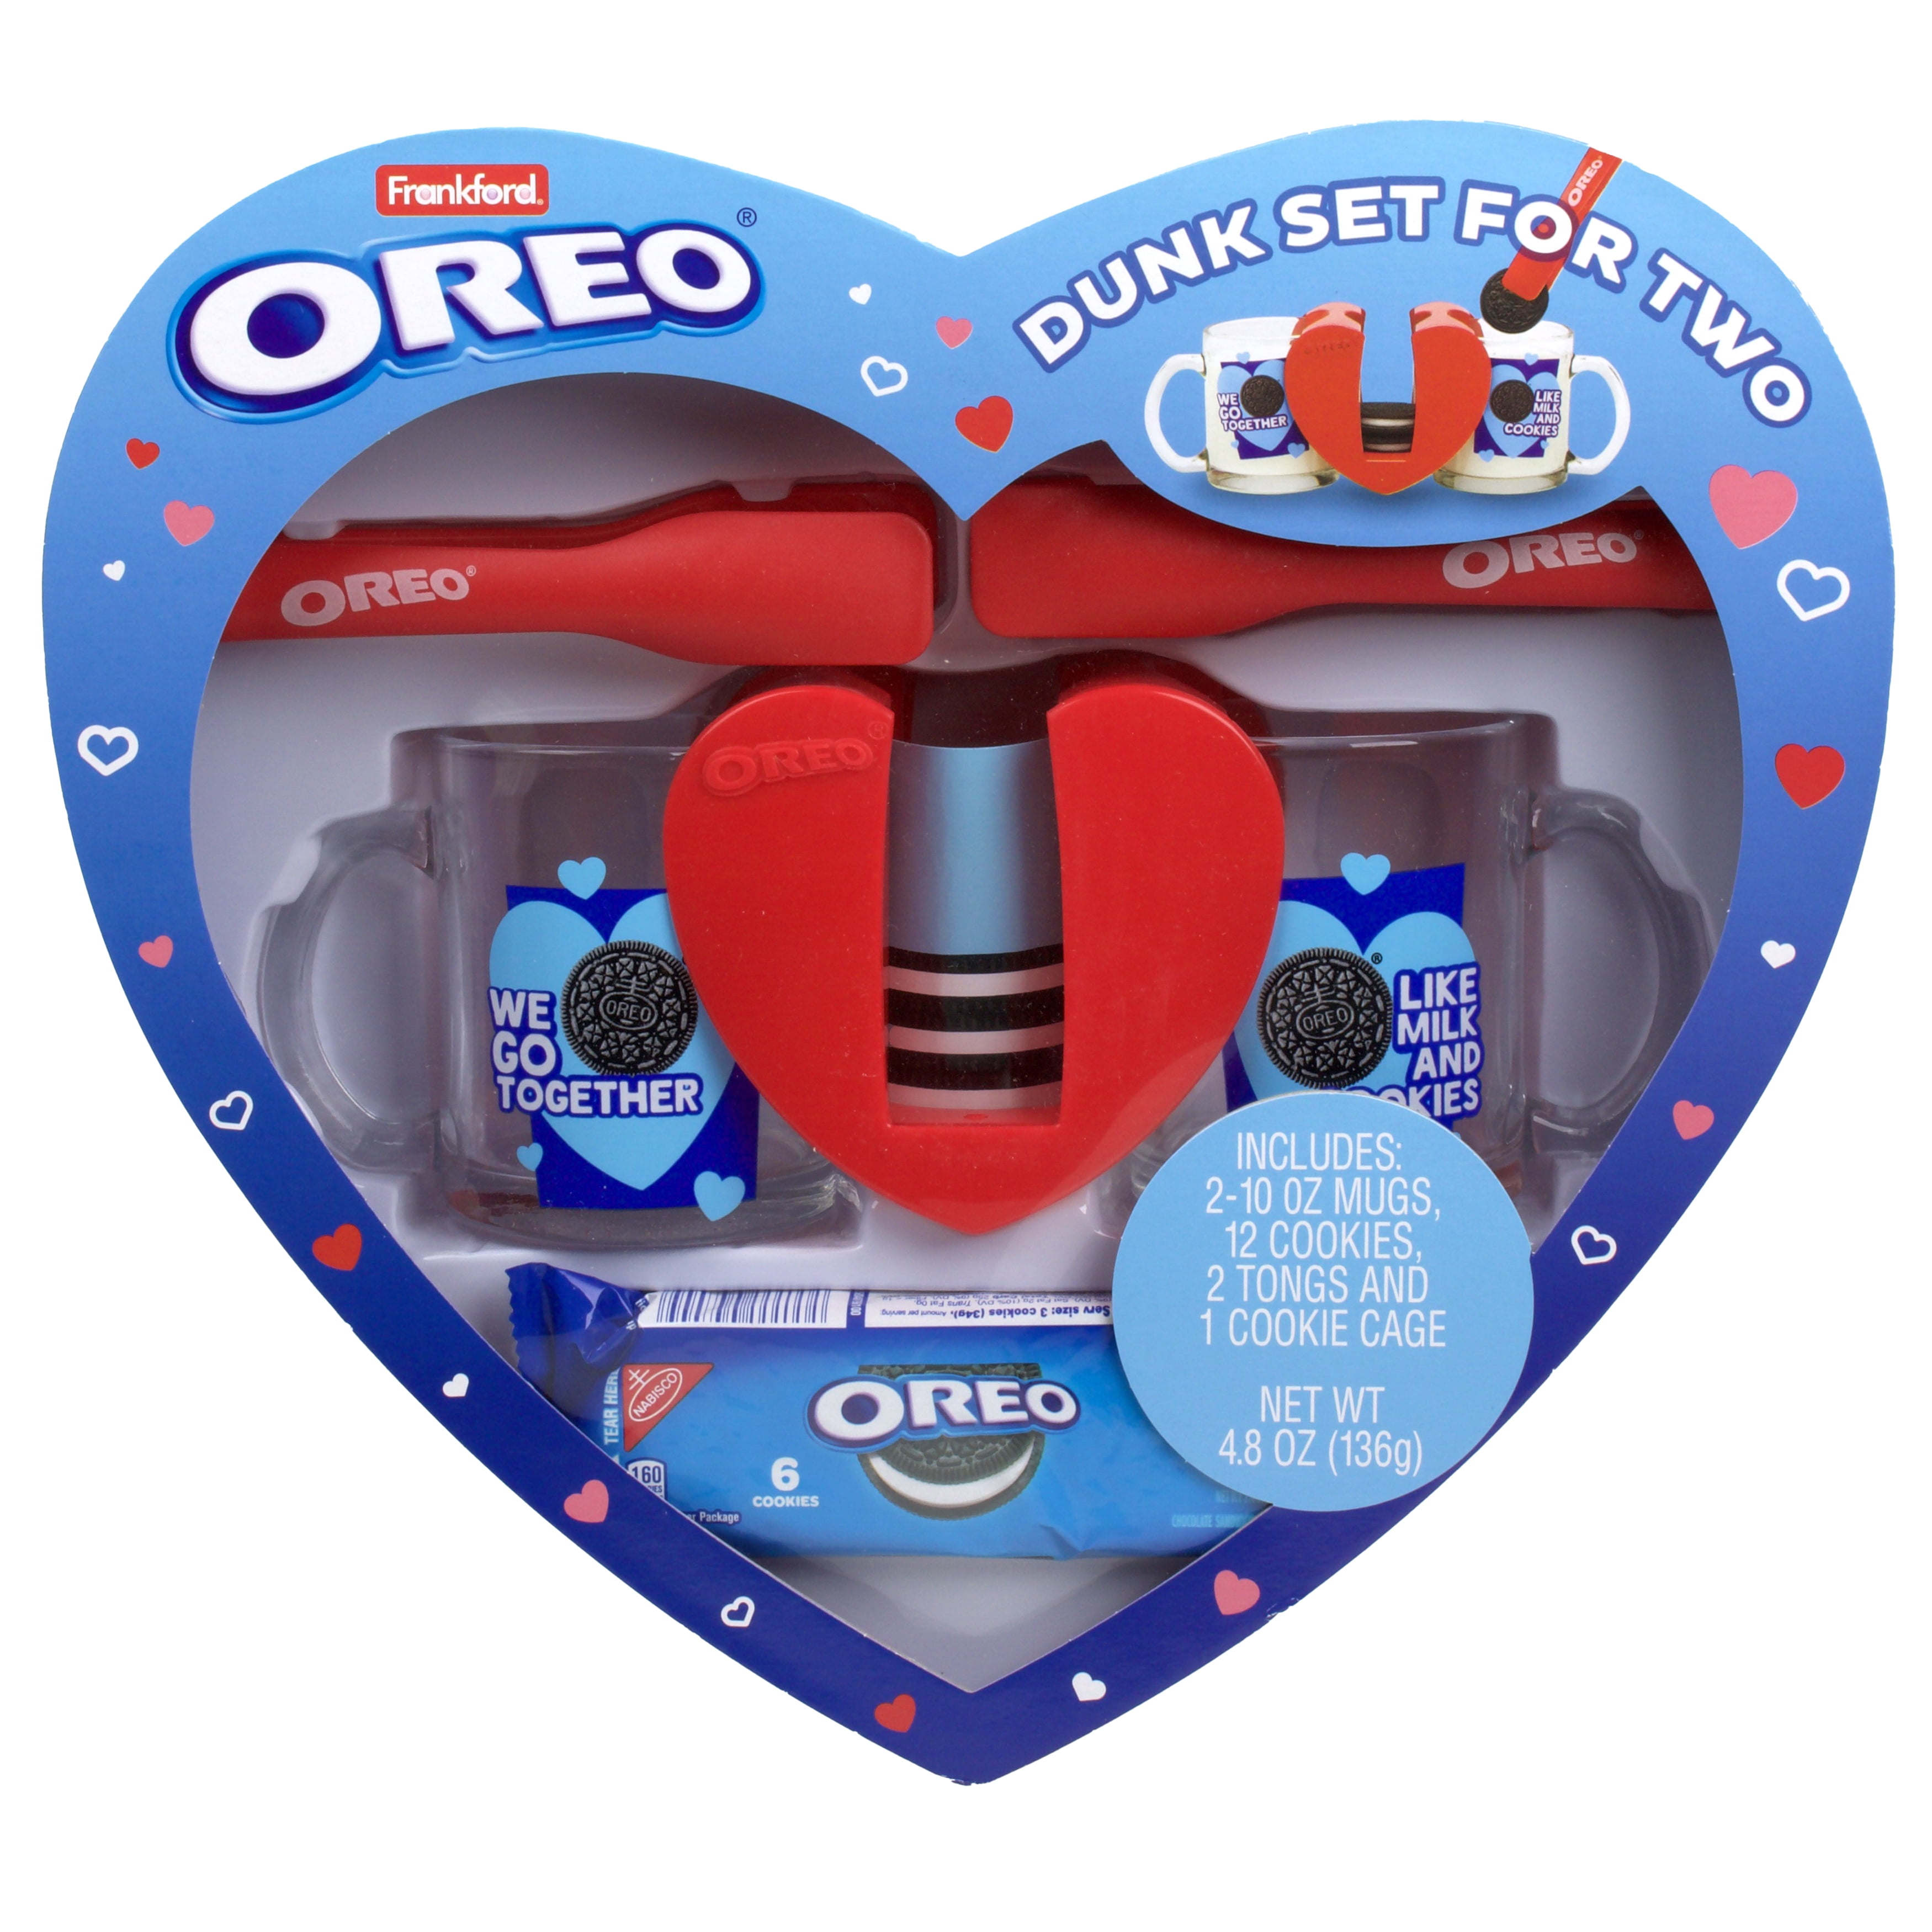 Oreo Cookie Dunking Set in Valentine's Day Heart Gift Box, 4.8 oz